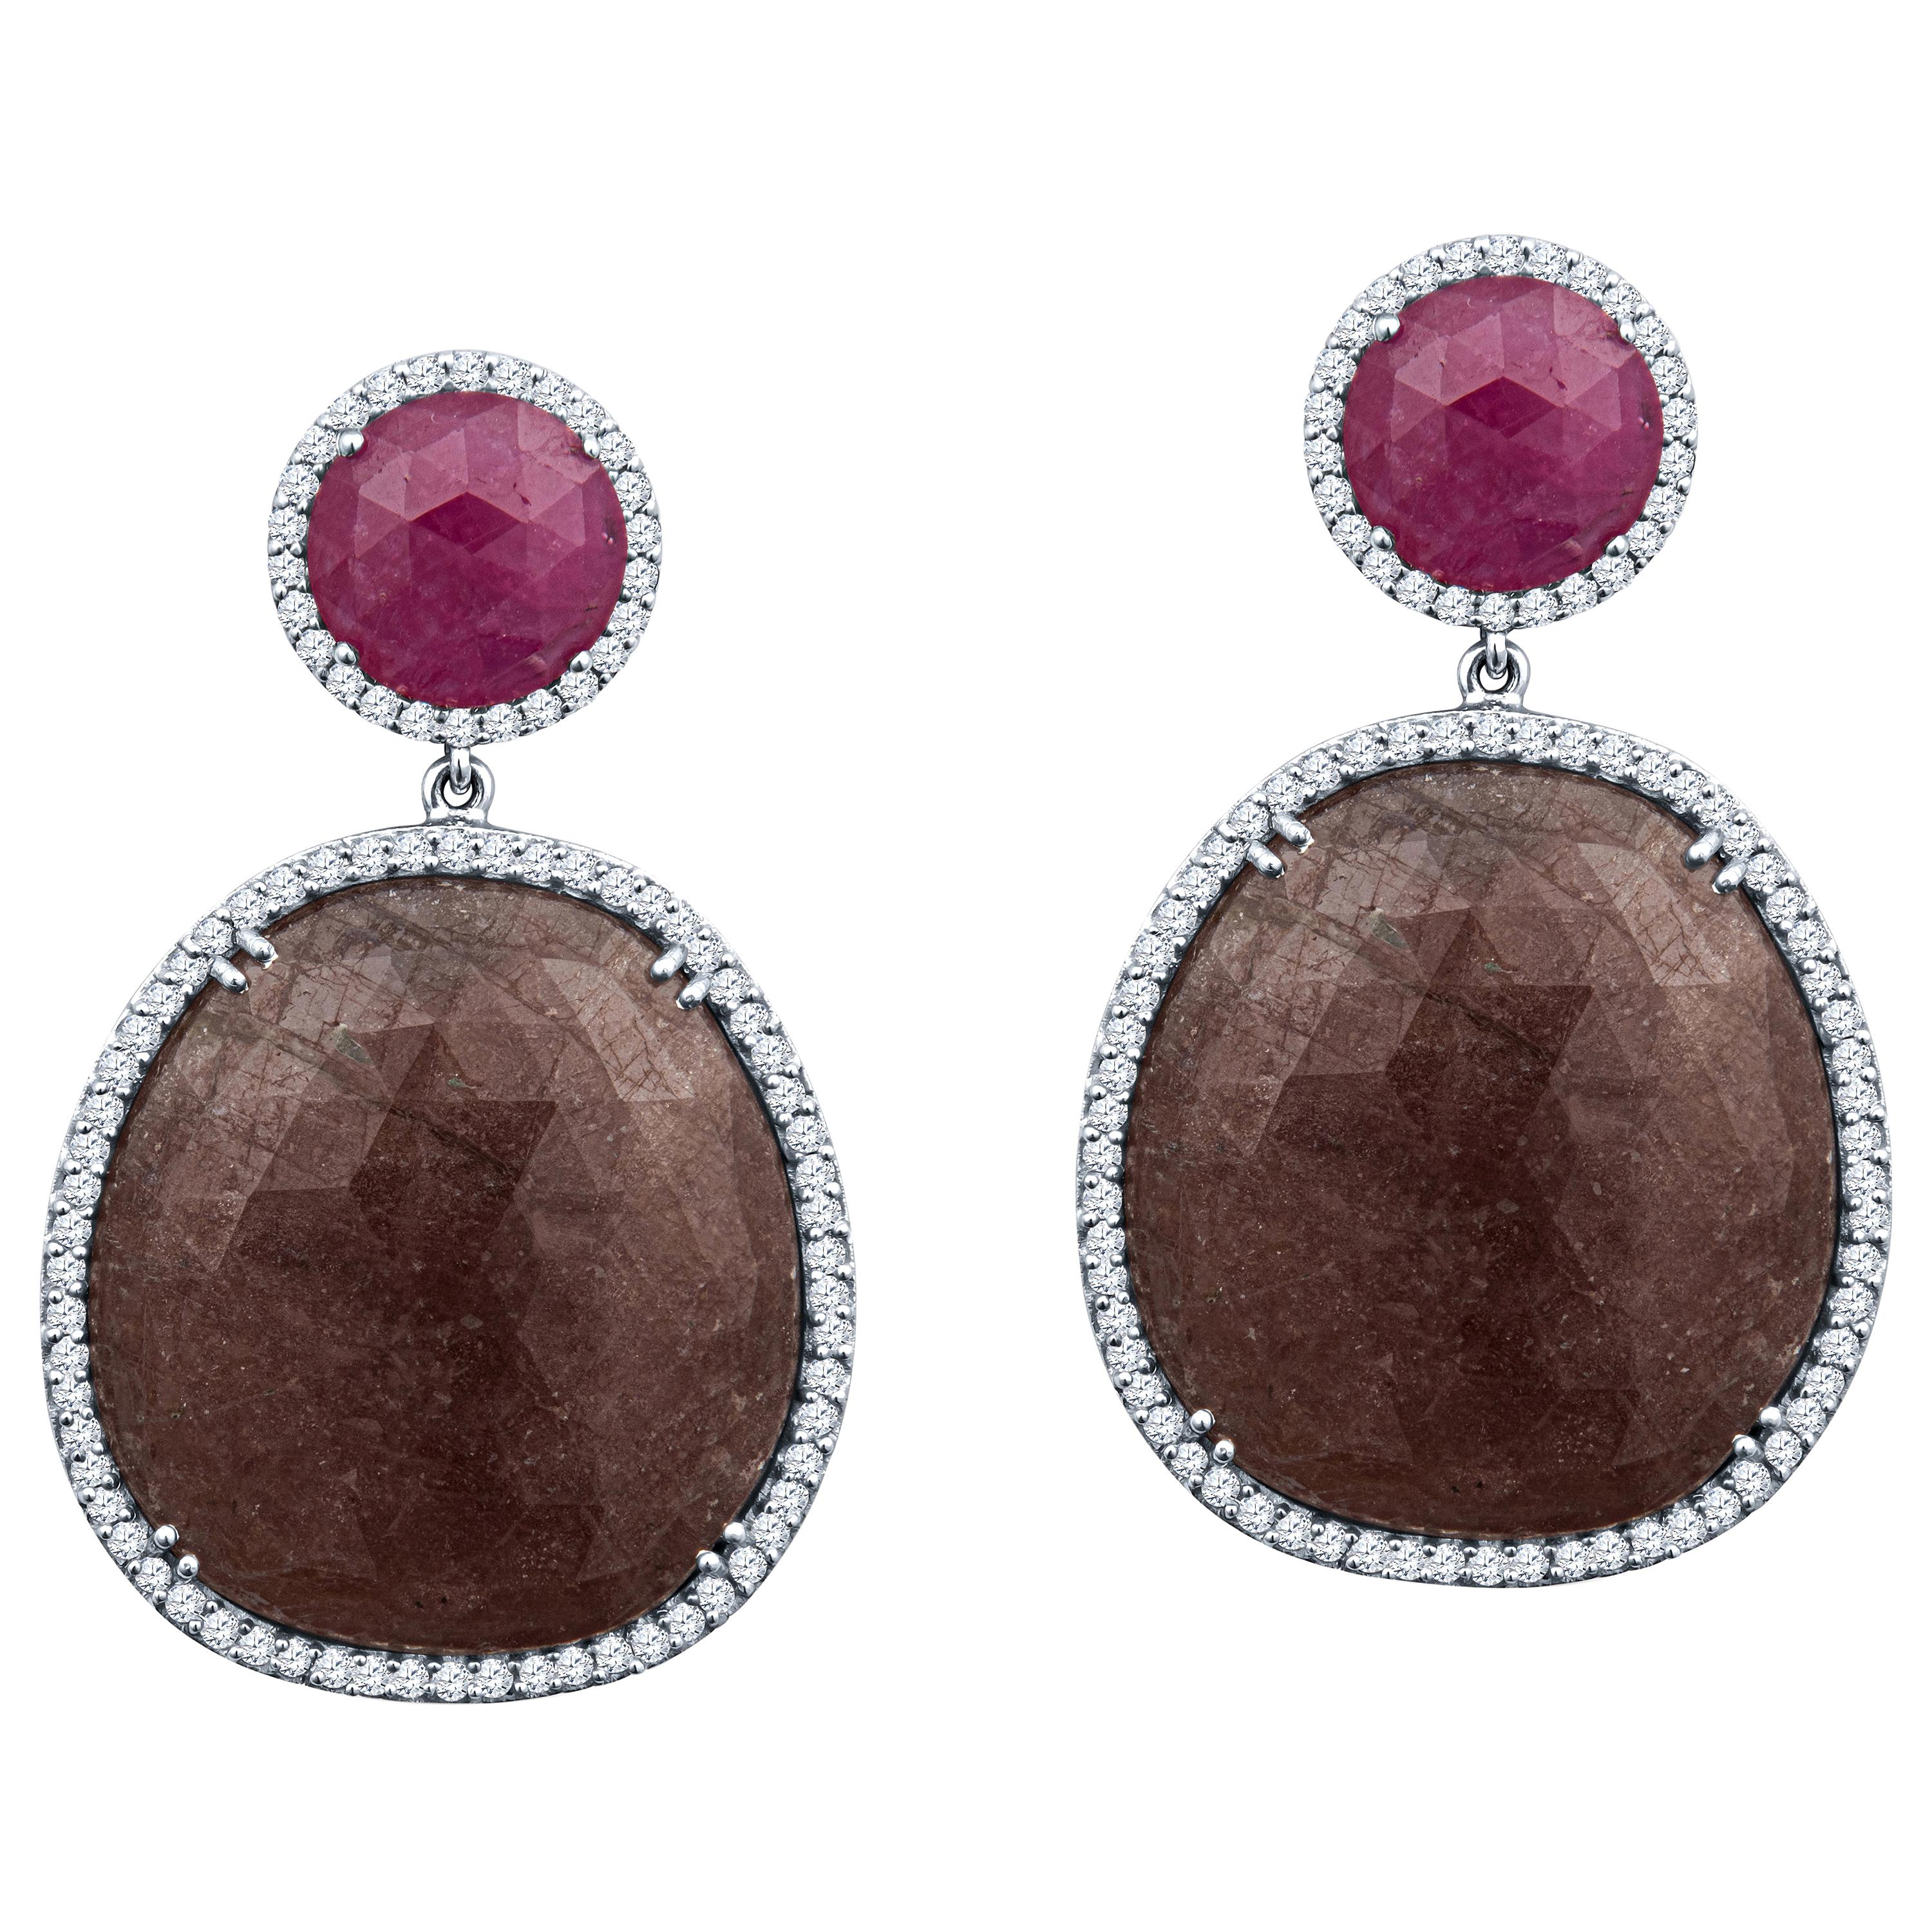 Large Ruby and Sapphire Drop Earrings with 1.80 Carat Round Diamond Halos